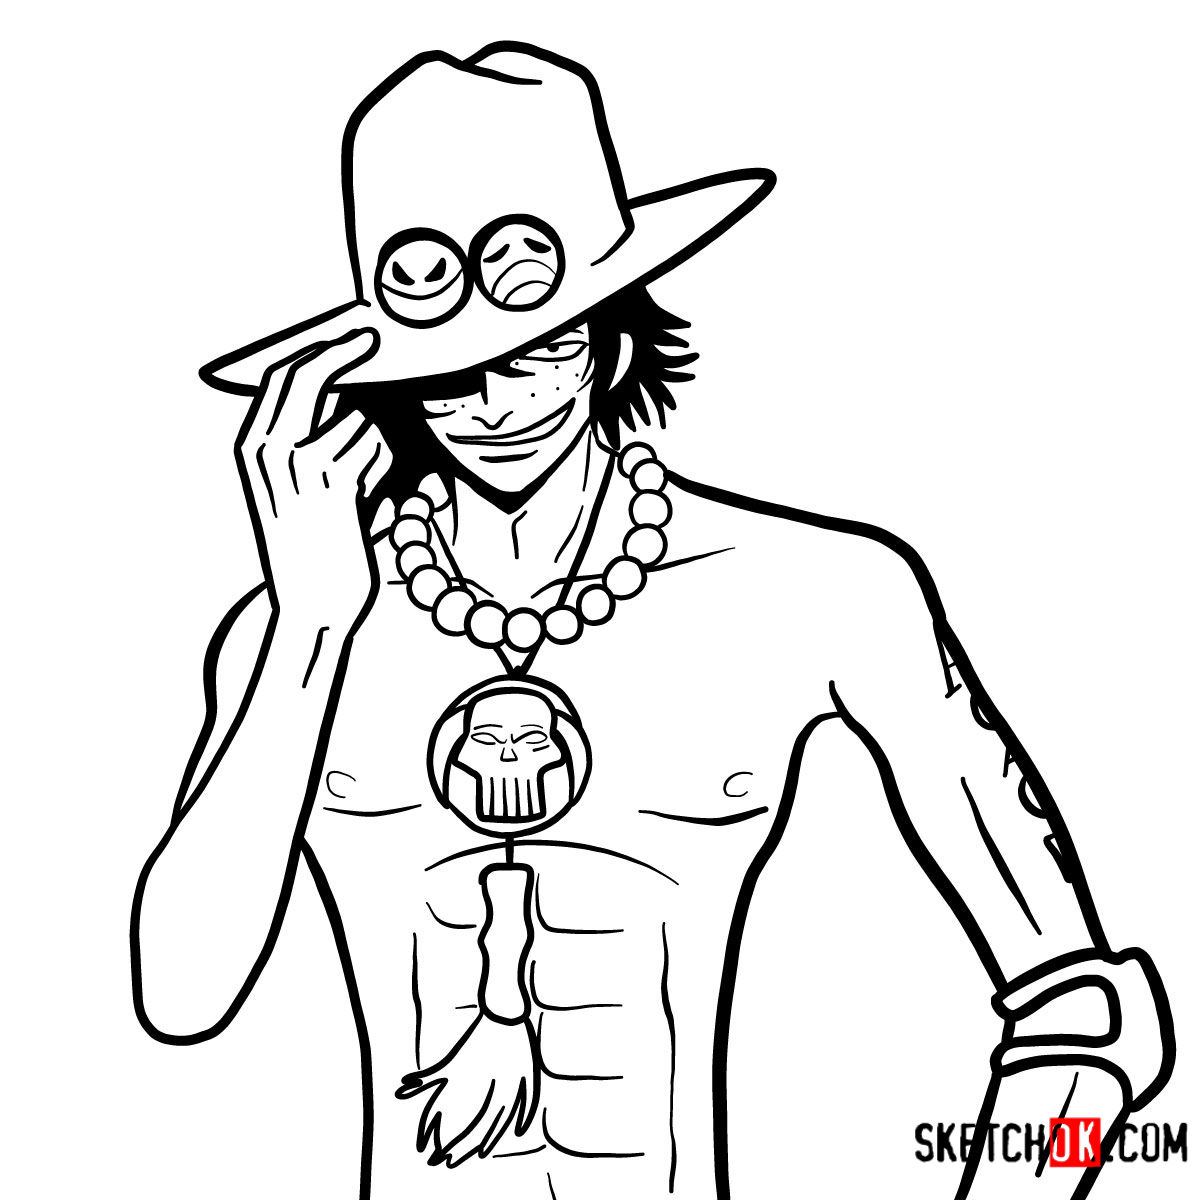 Vẽ ACE trong Đảo hải tặc Drawing One Piece  YouTube